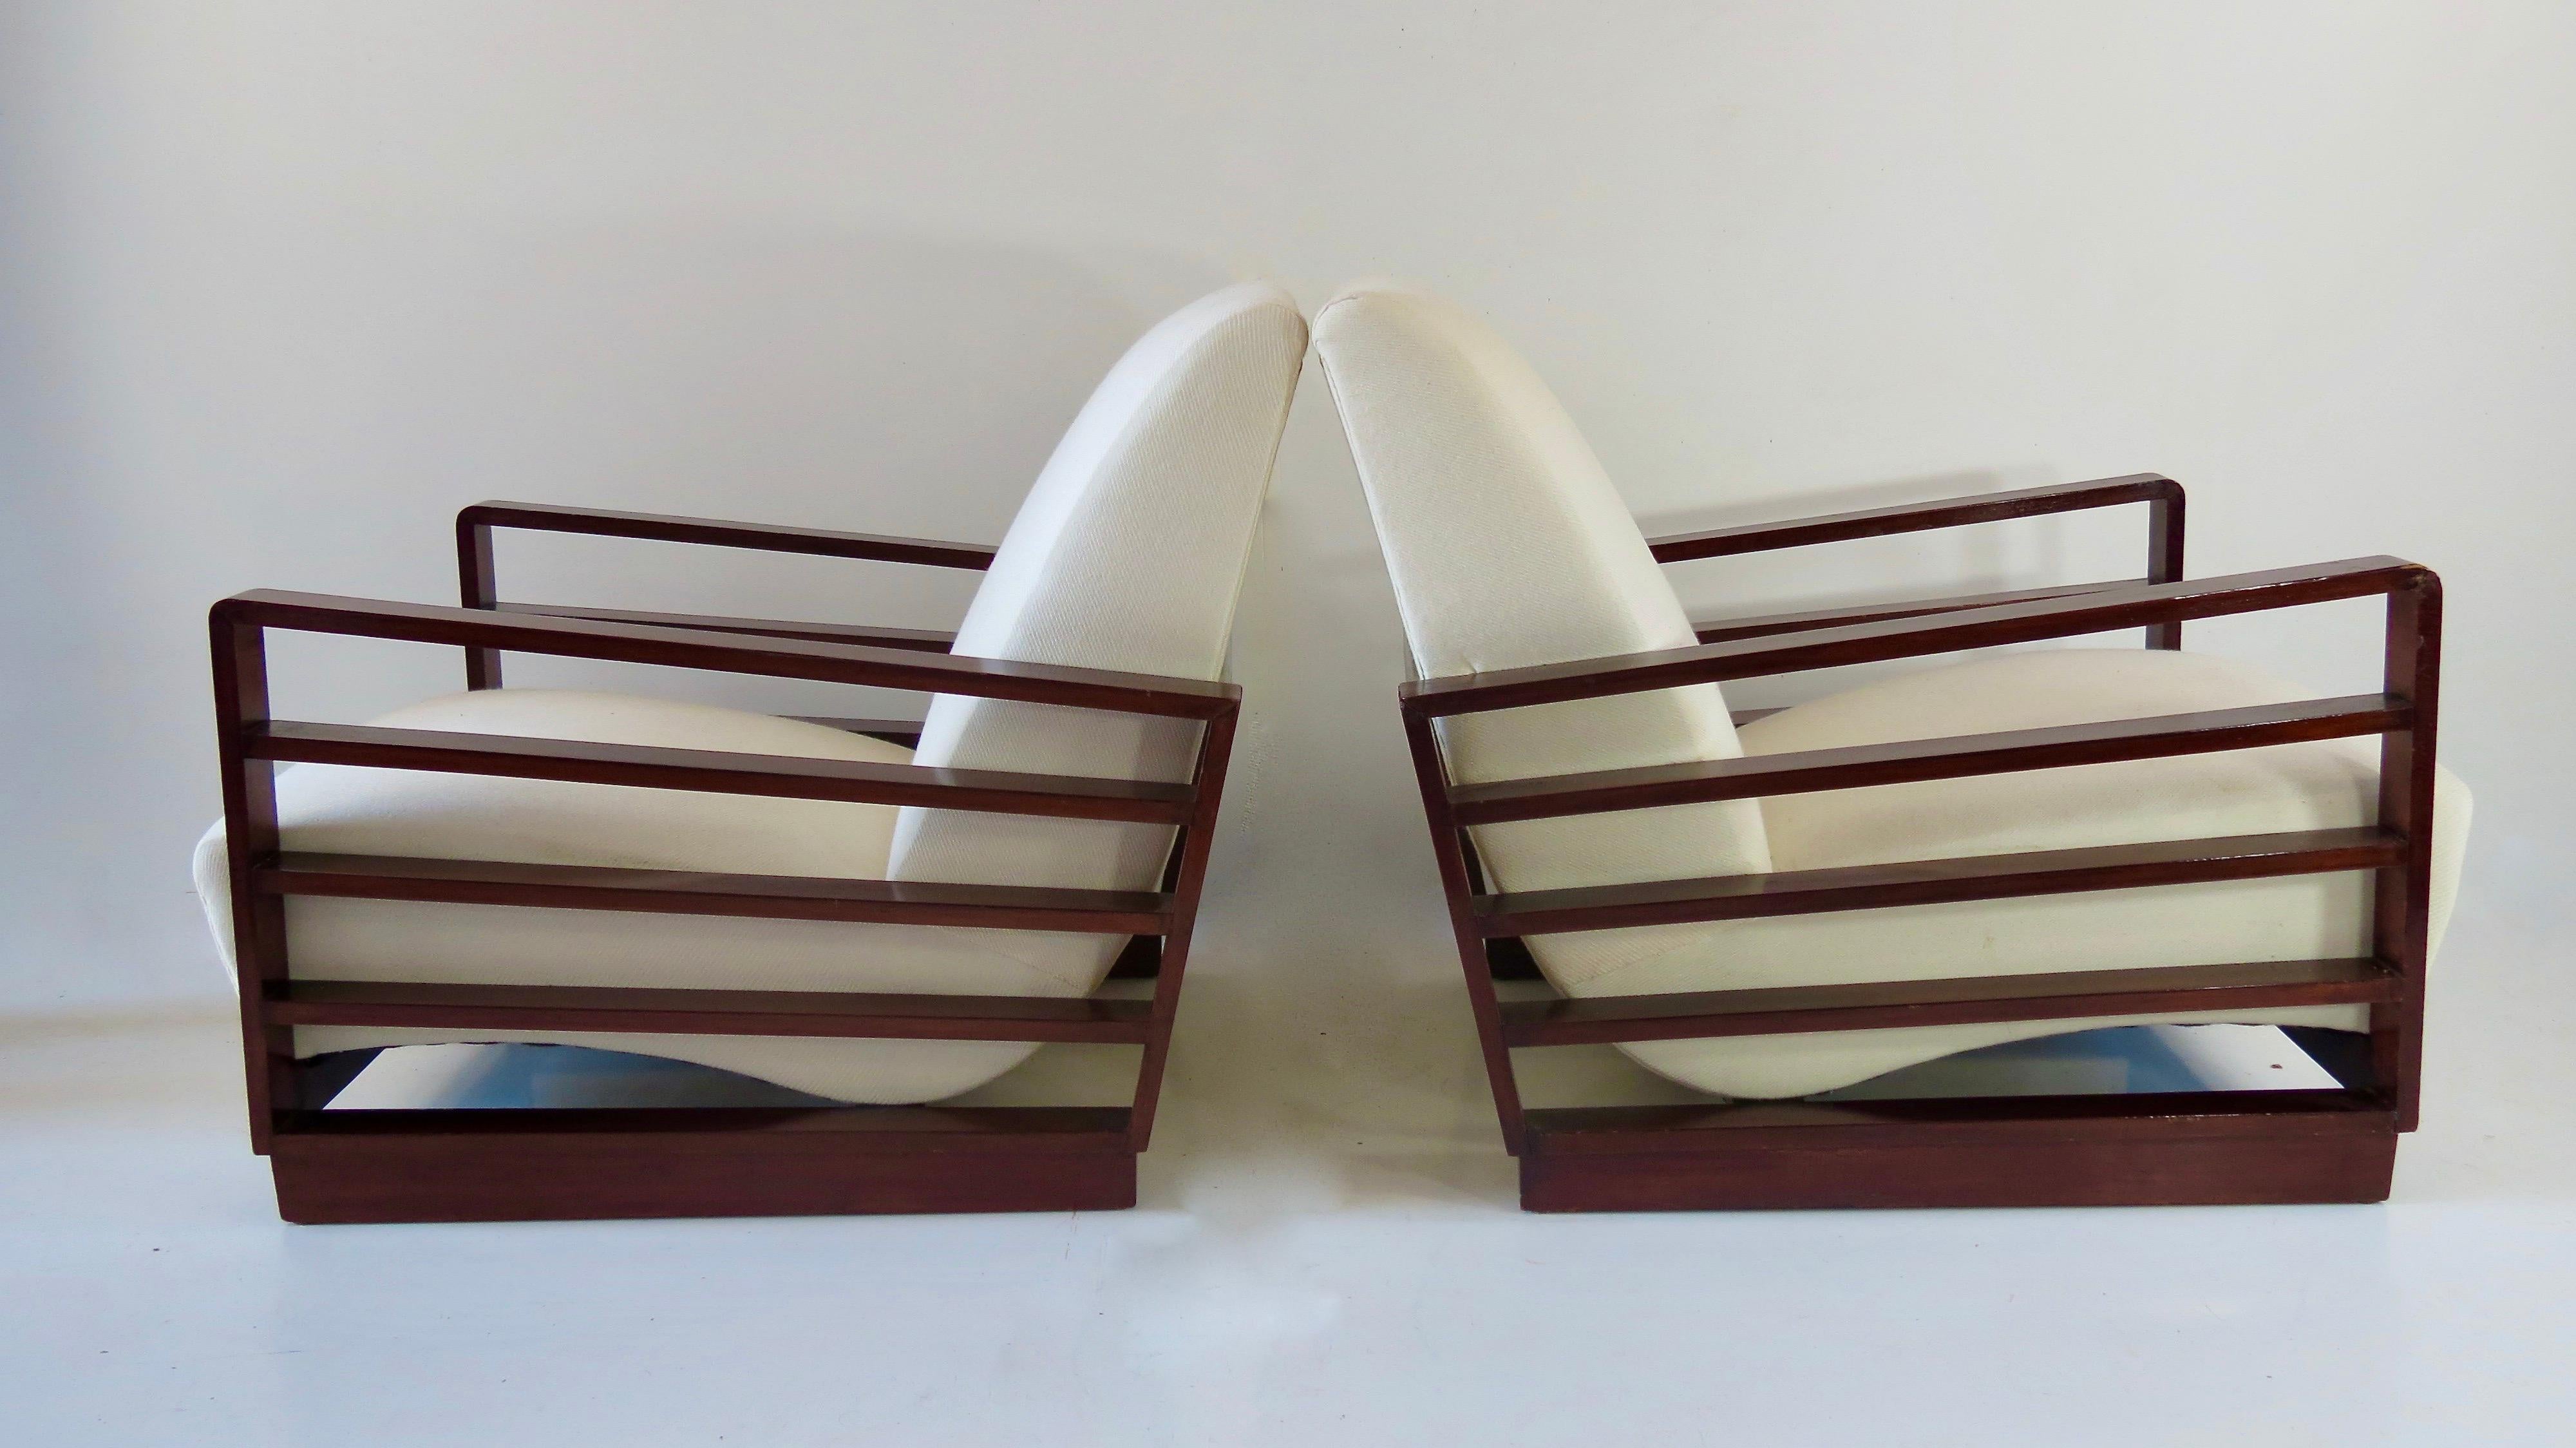 Exceptional pair of rationalist lounge chairs attributed to Mario Quarti, circa 1940
elegant and essential line
re-upholstery in white cotton
beech wood, cotton fabric, steel
Measures: 78 x 84 cm height 76 cm, seat height 37 cm
good condition.